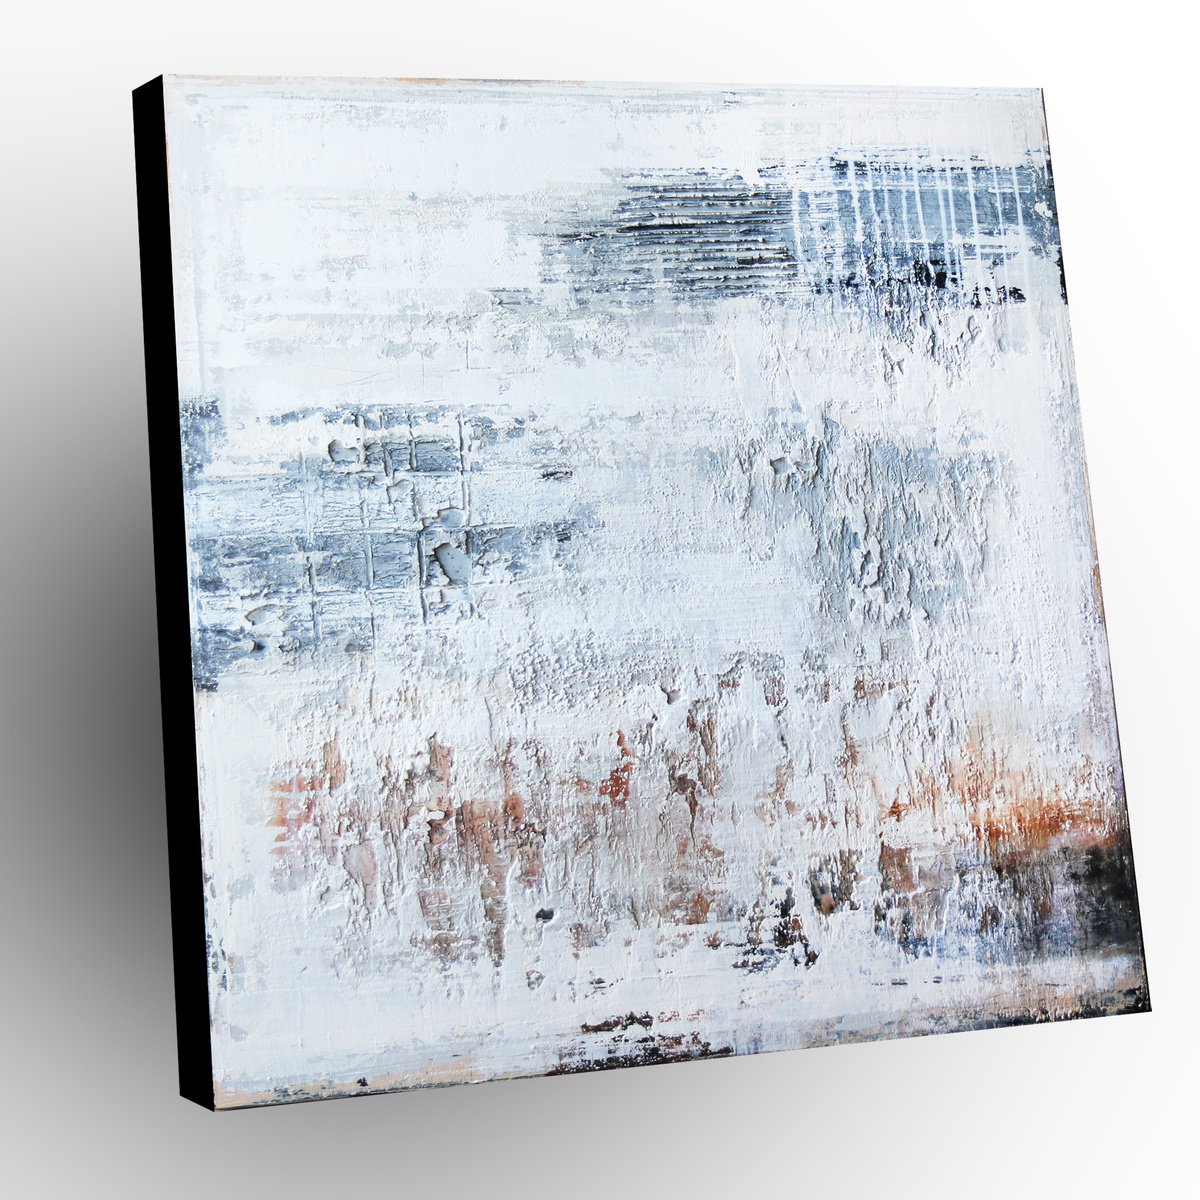 COLD DAY - ABSTRACT ACRYLIC PAINTING TEXTURED * PASTEL COLORS * RUST * READY TO HANG by Inez Froehlich